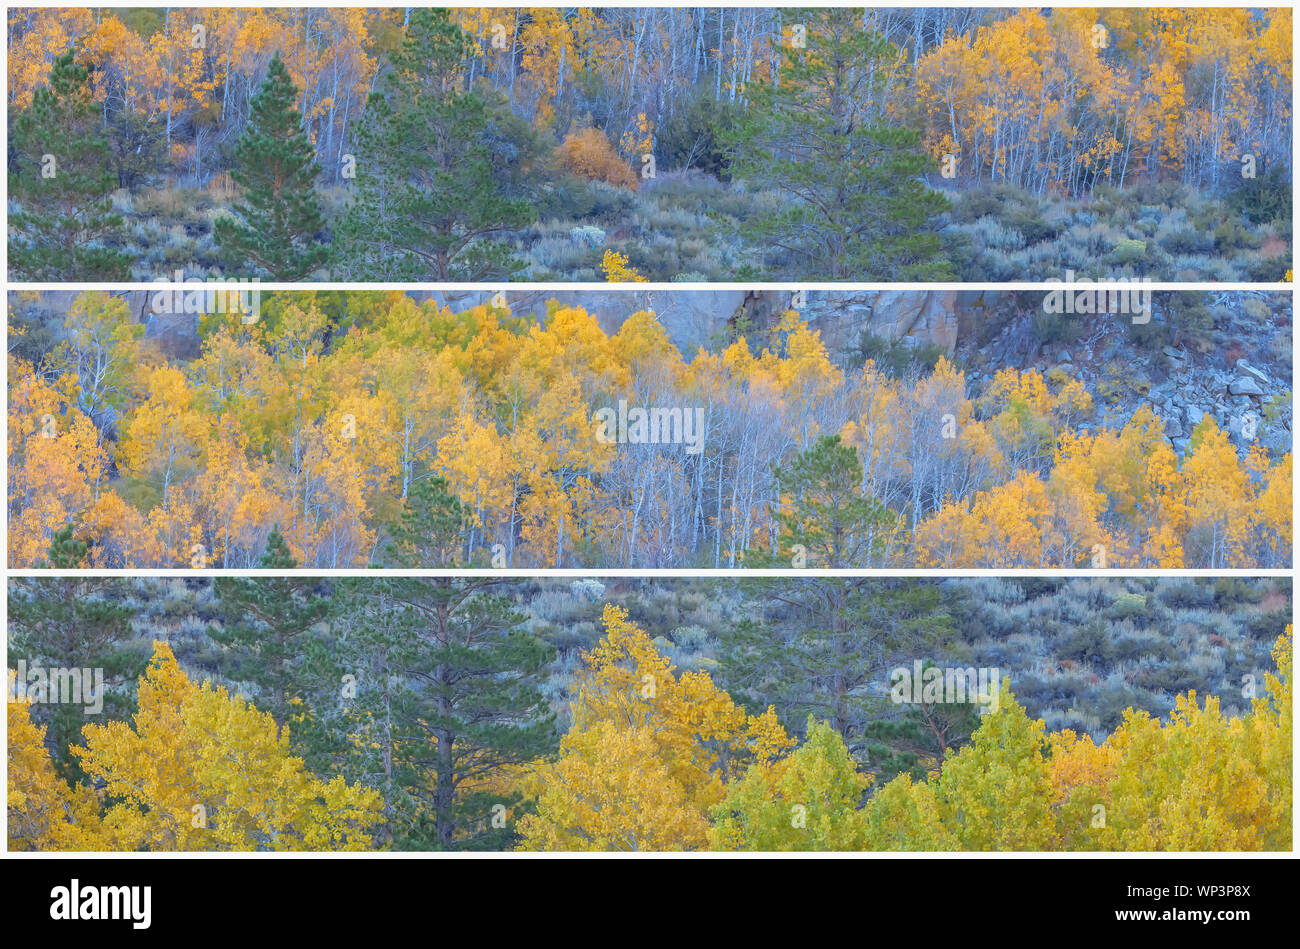 Triptych presentation of mountain aspens (Populus tremuloides)  at their peak fall foliage, Inyo National Forest, California, United States. Stock Photo